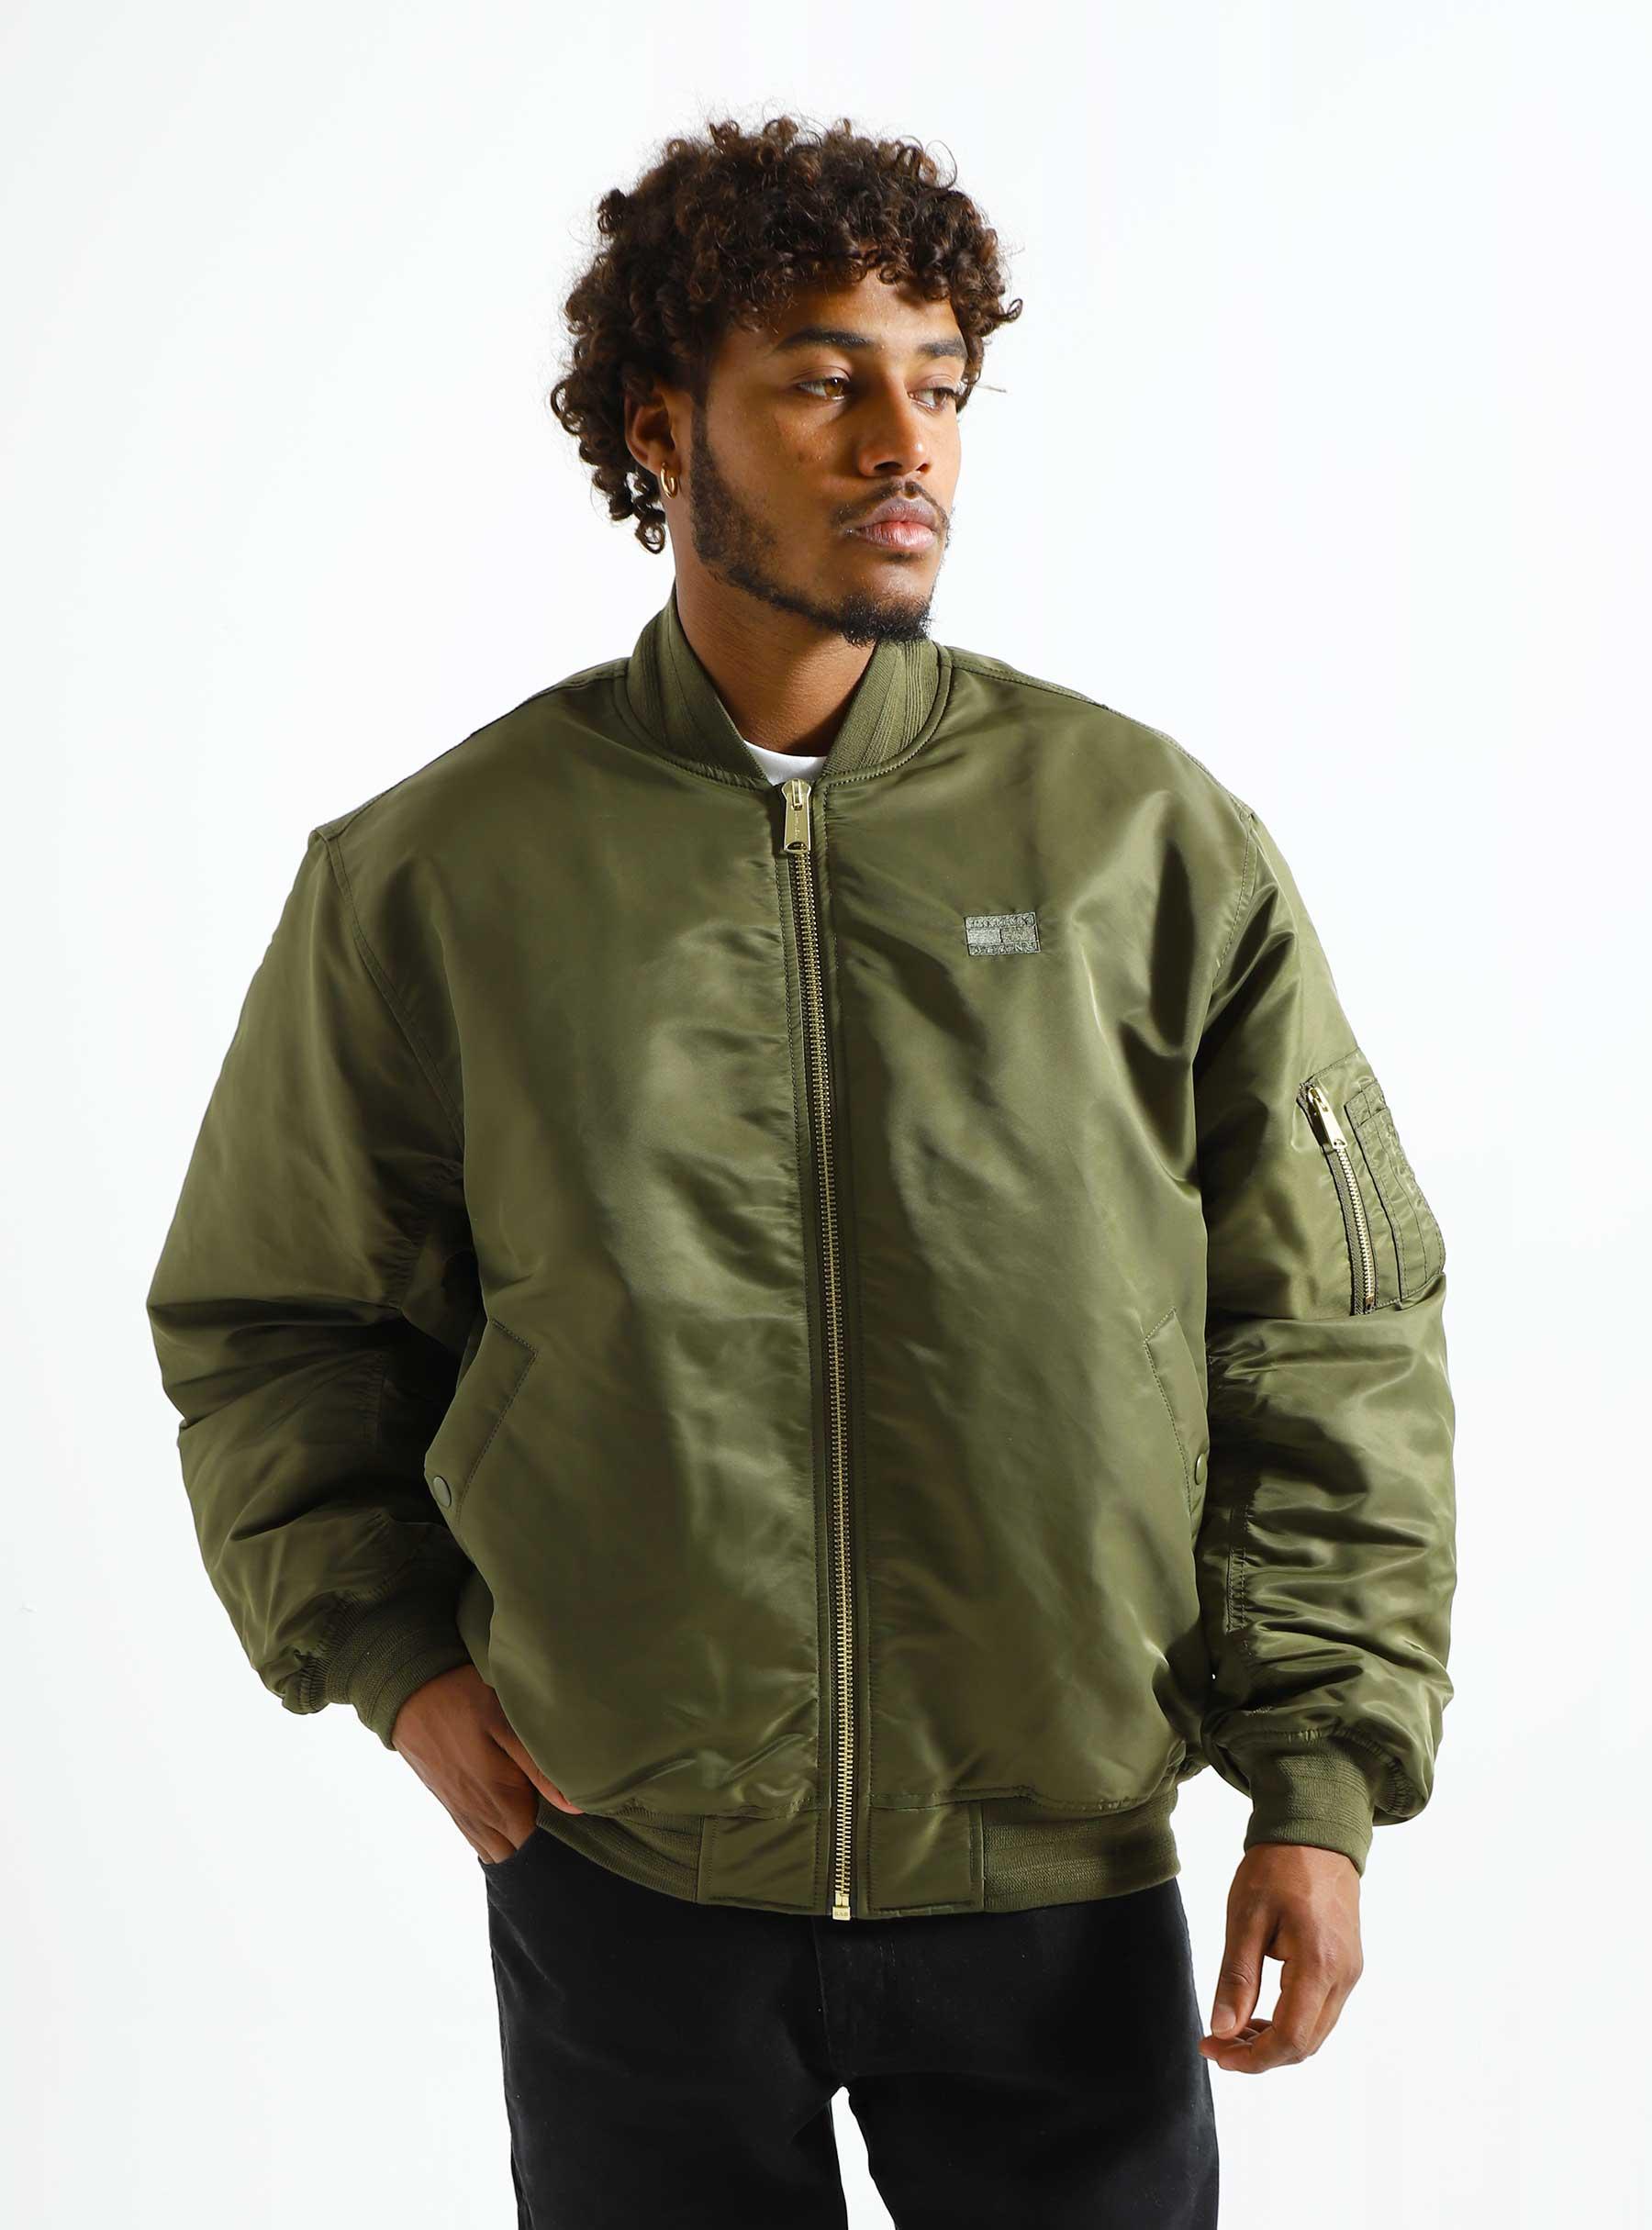 Jeans Freshcotton Army Drab Authentic TJM Green Tommy Olive Jacket -